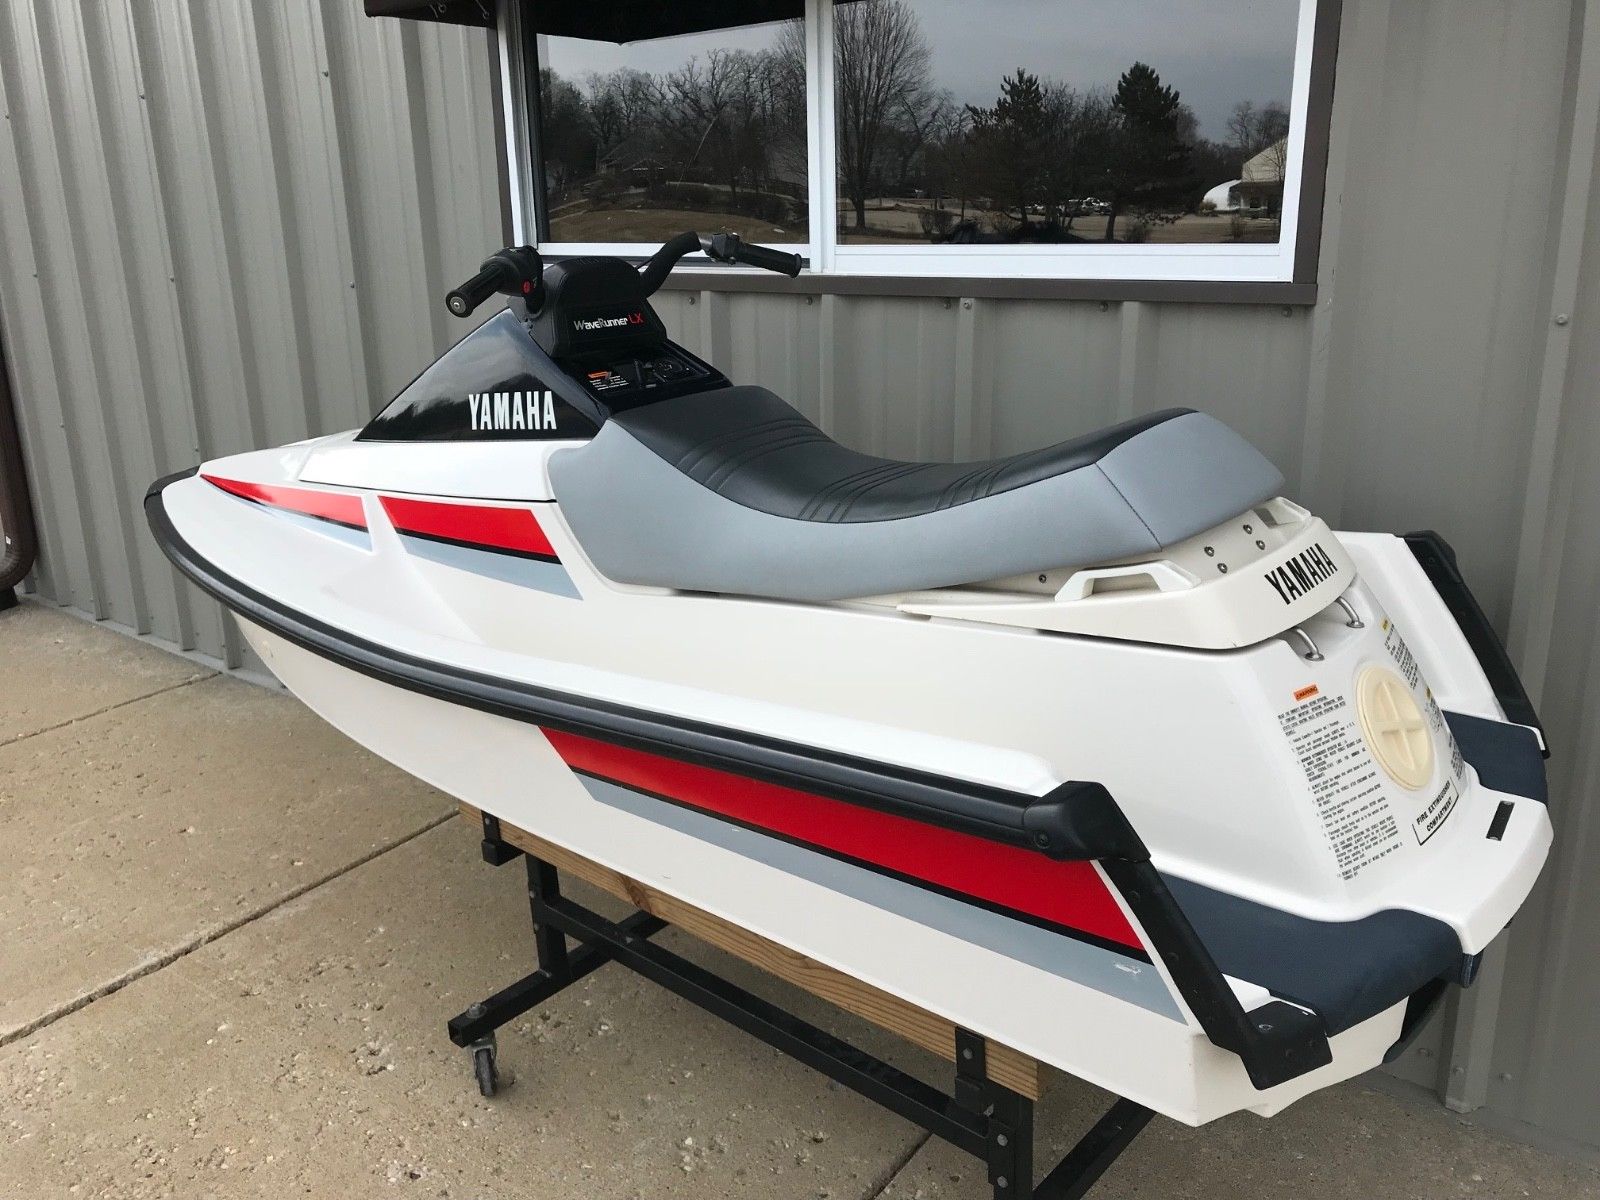 Yamaha Wave Runner 1990 for sale for 500